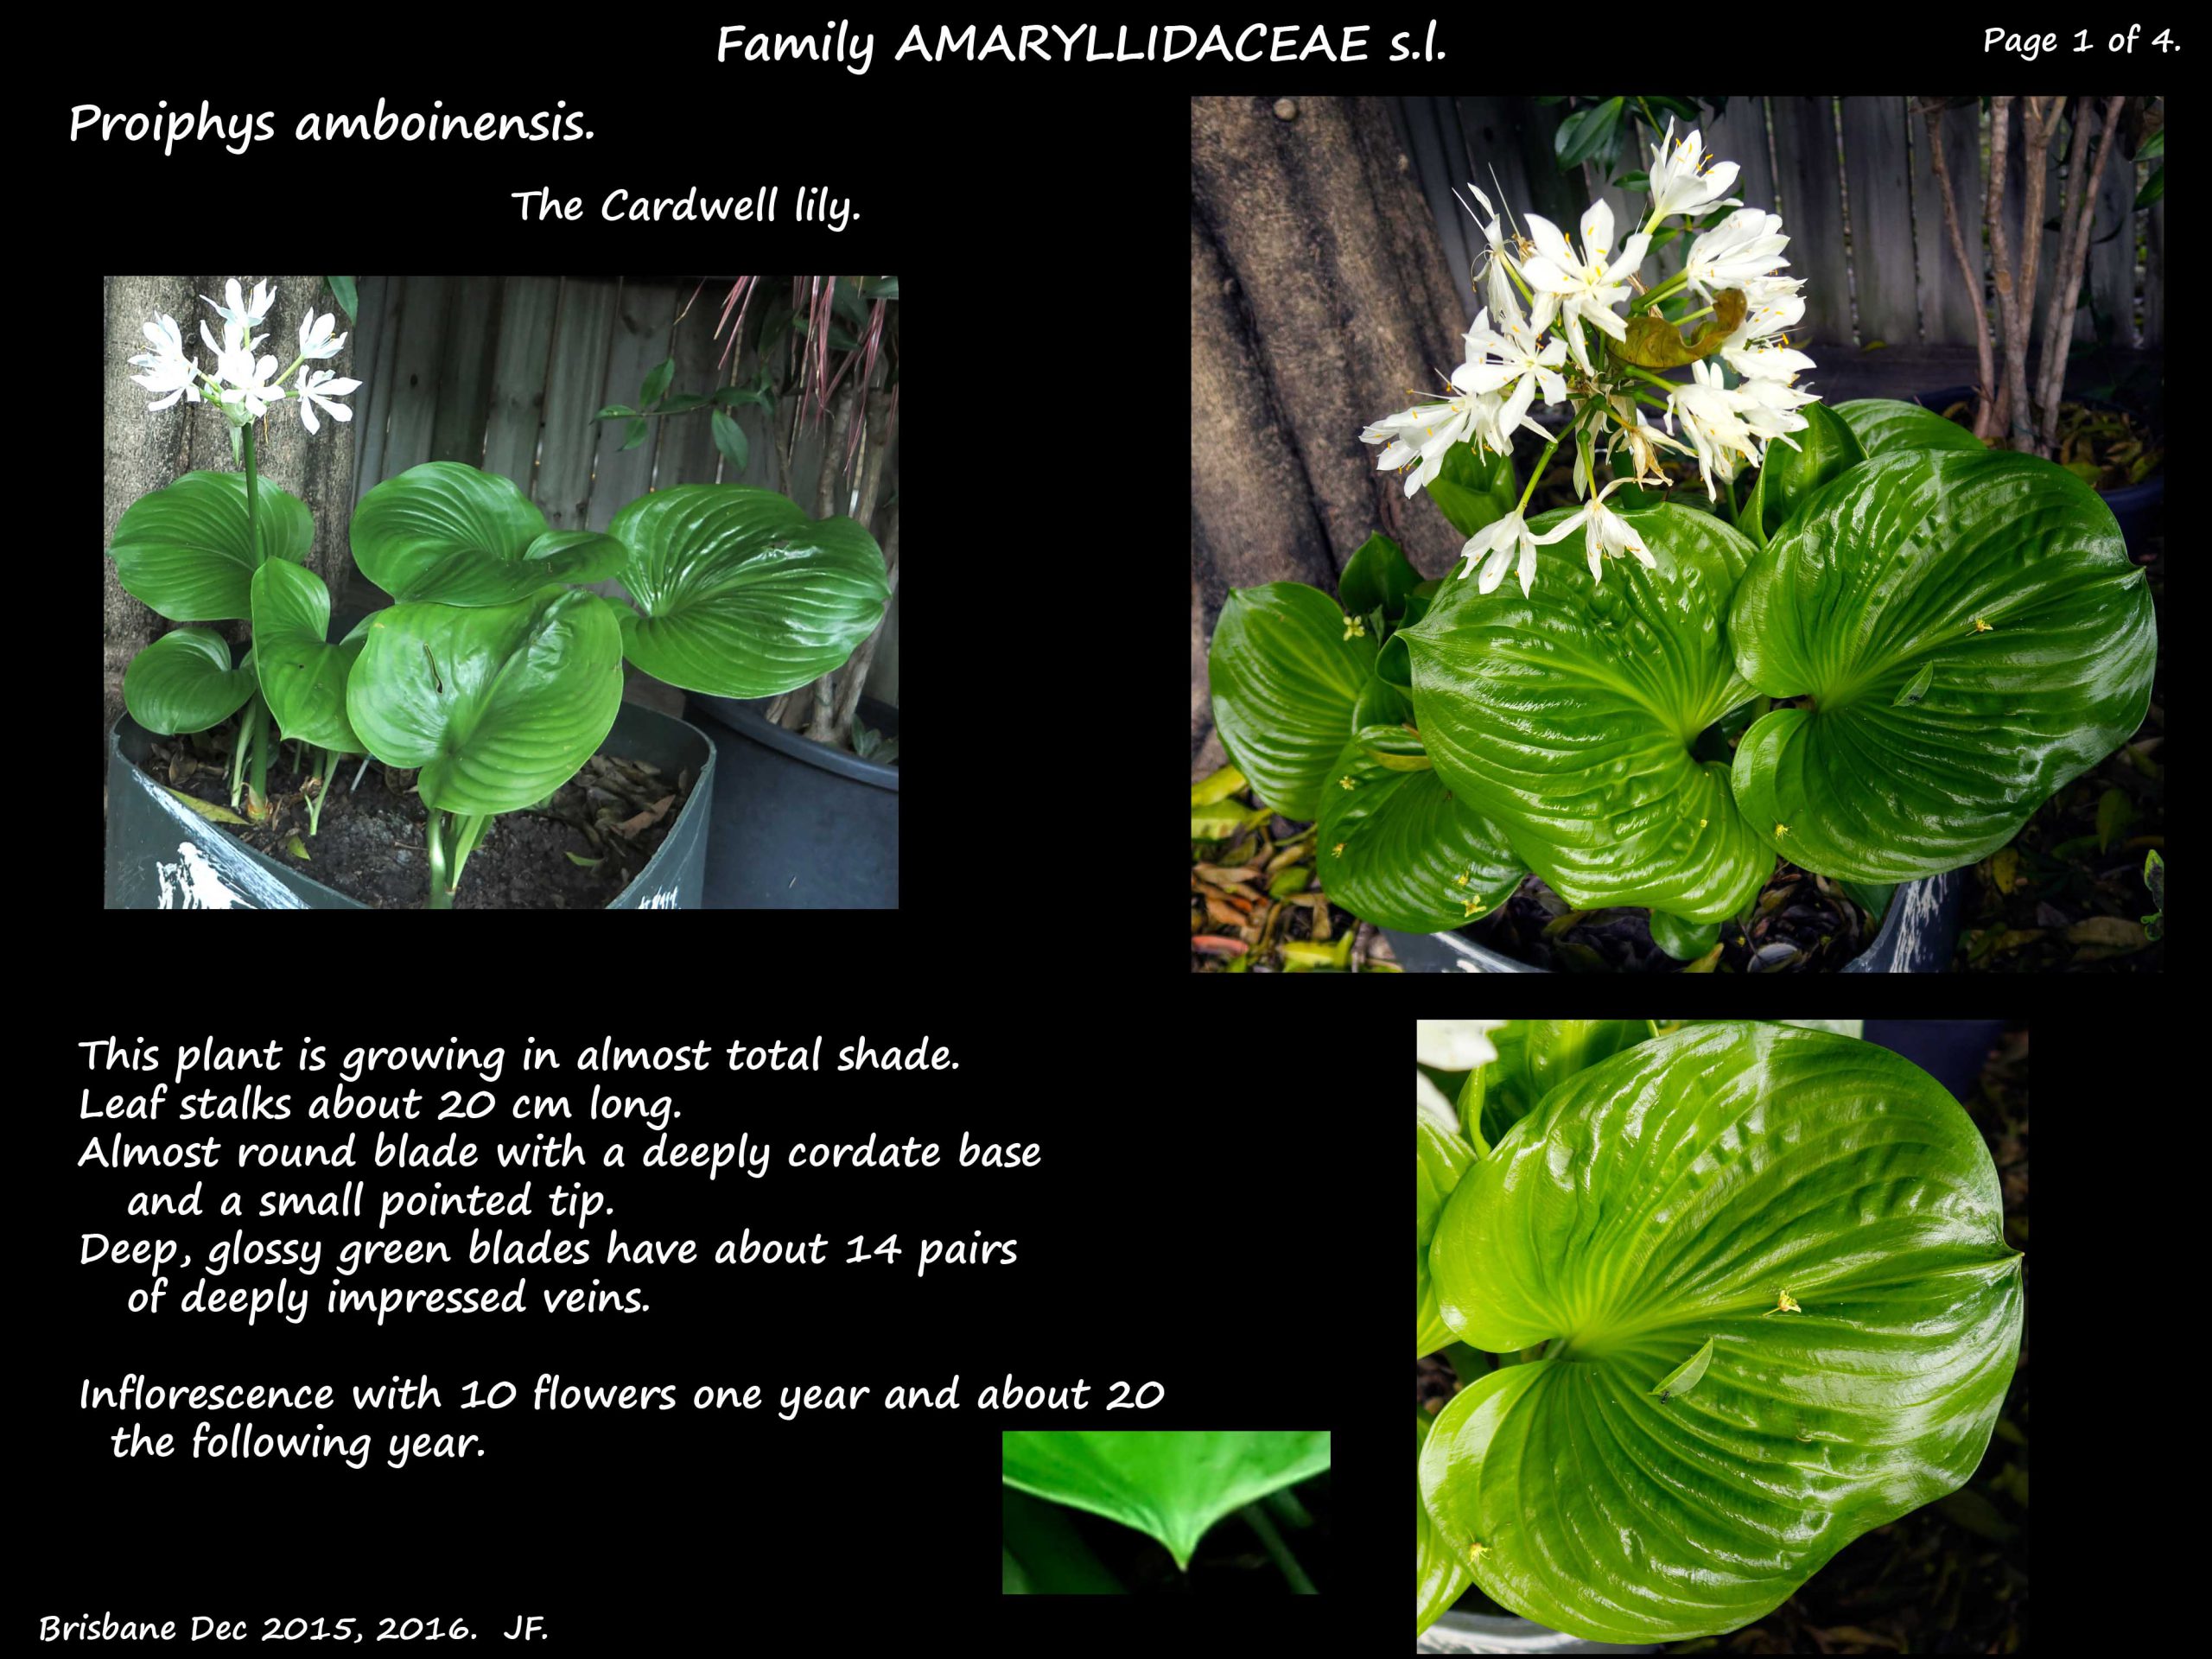 1 Cardwell lily plants & leaves